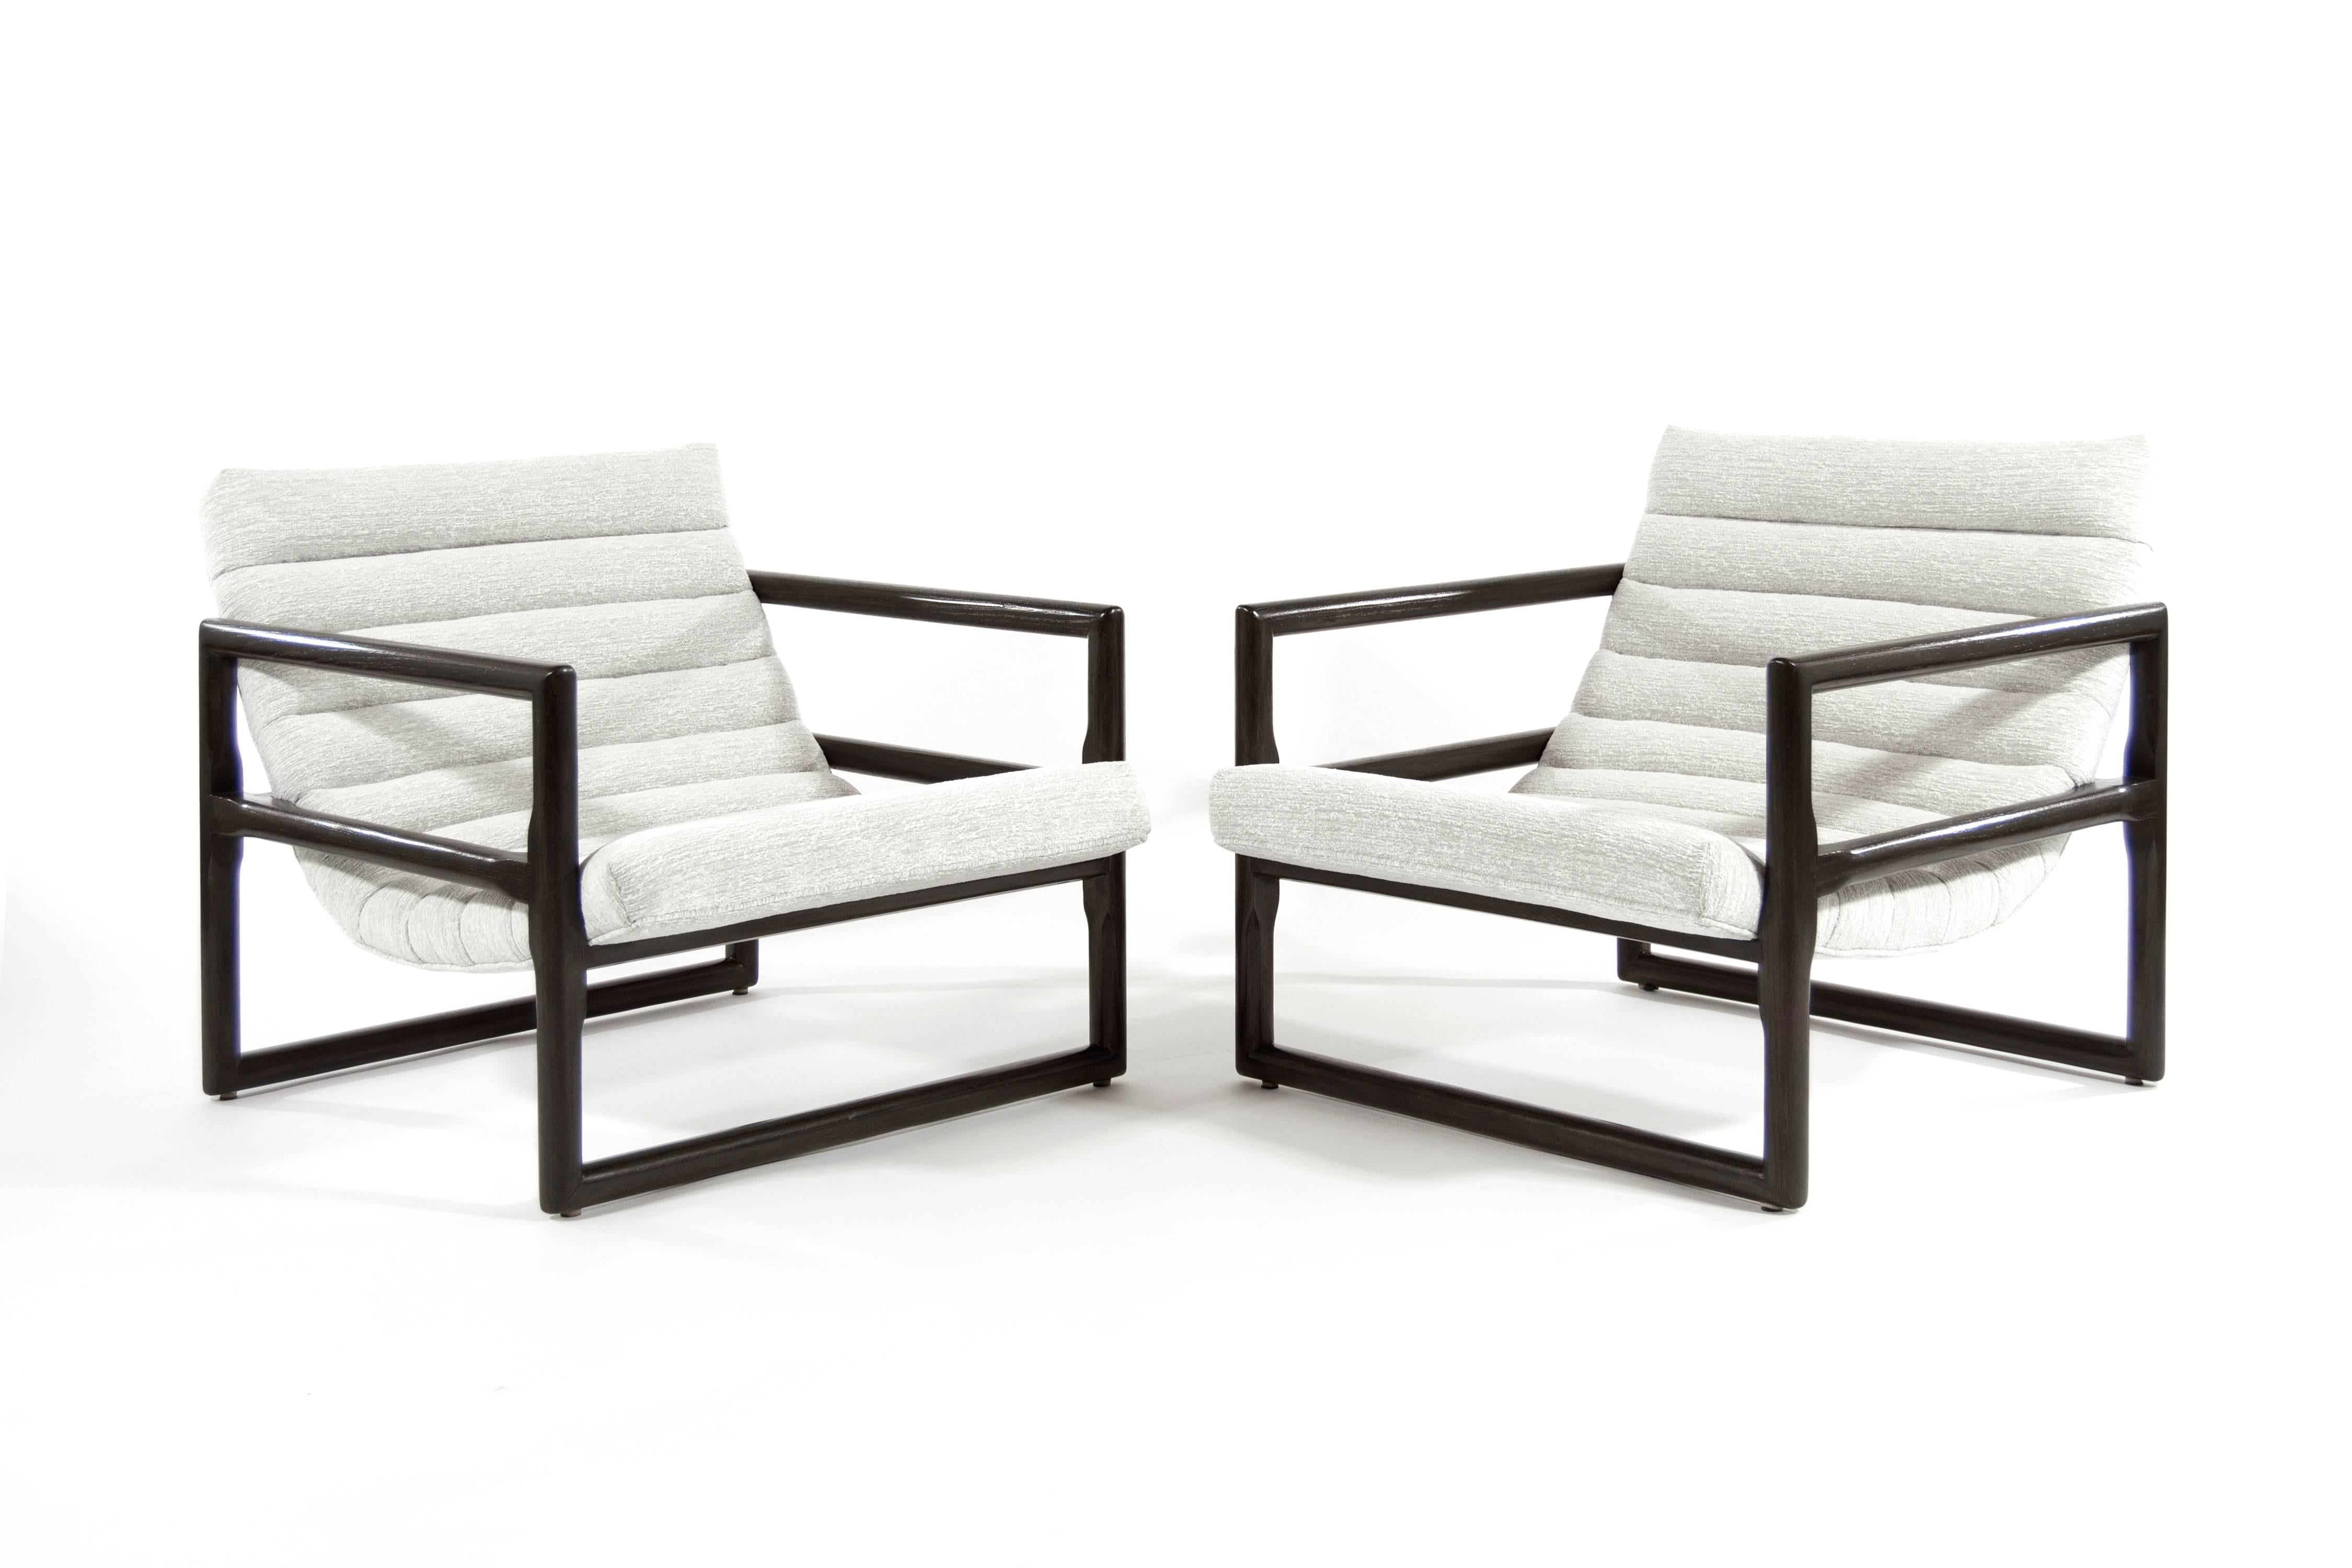 Stylish channelled lounges designed by Milo Baughman for Thayer Coggin. Solid oak frames have been newly refinished. Newly upholstered in grey chenille.